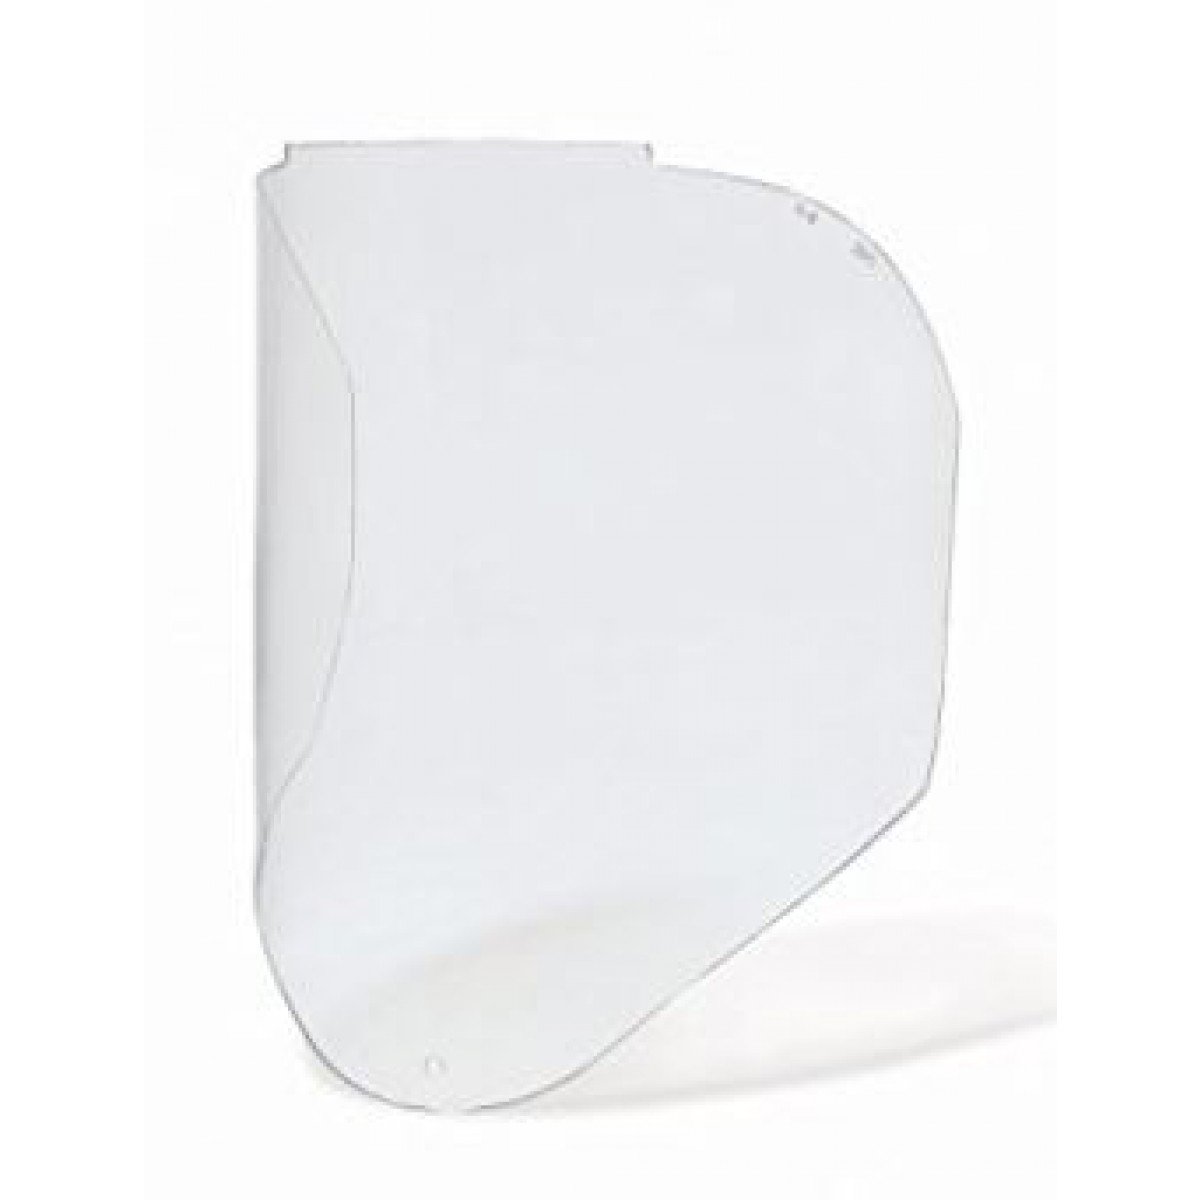 Bionic Faceshield Replacement Visor PC Clear